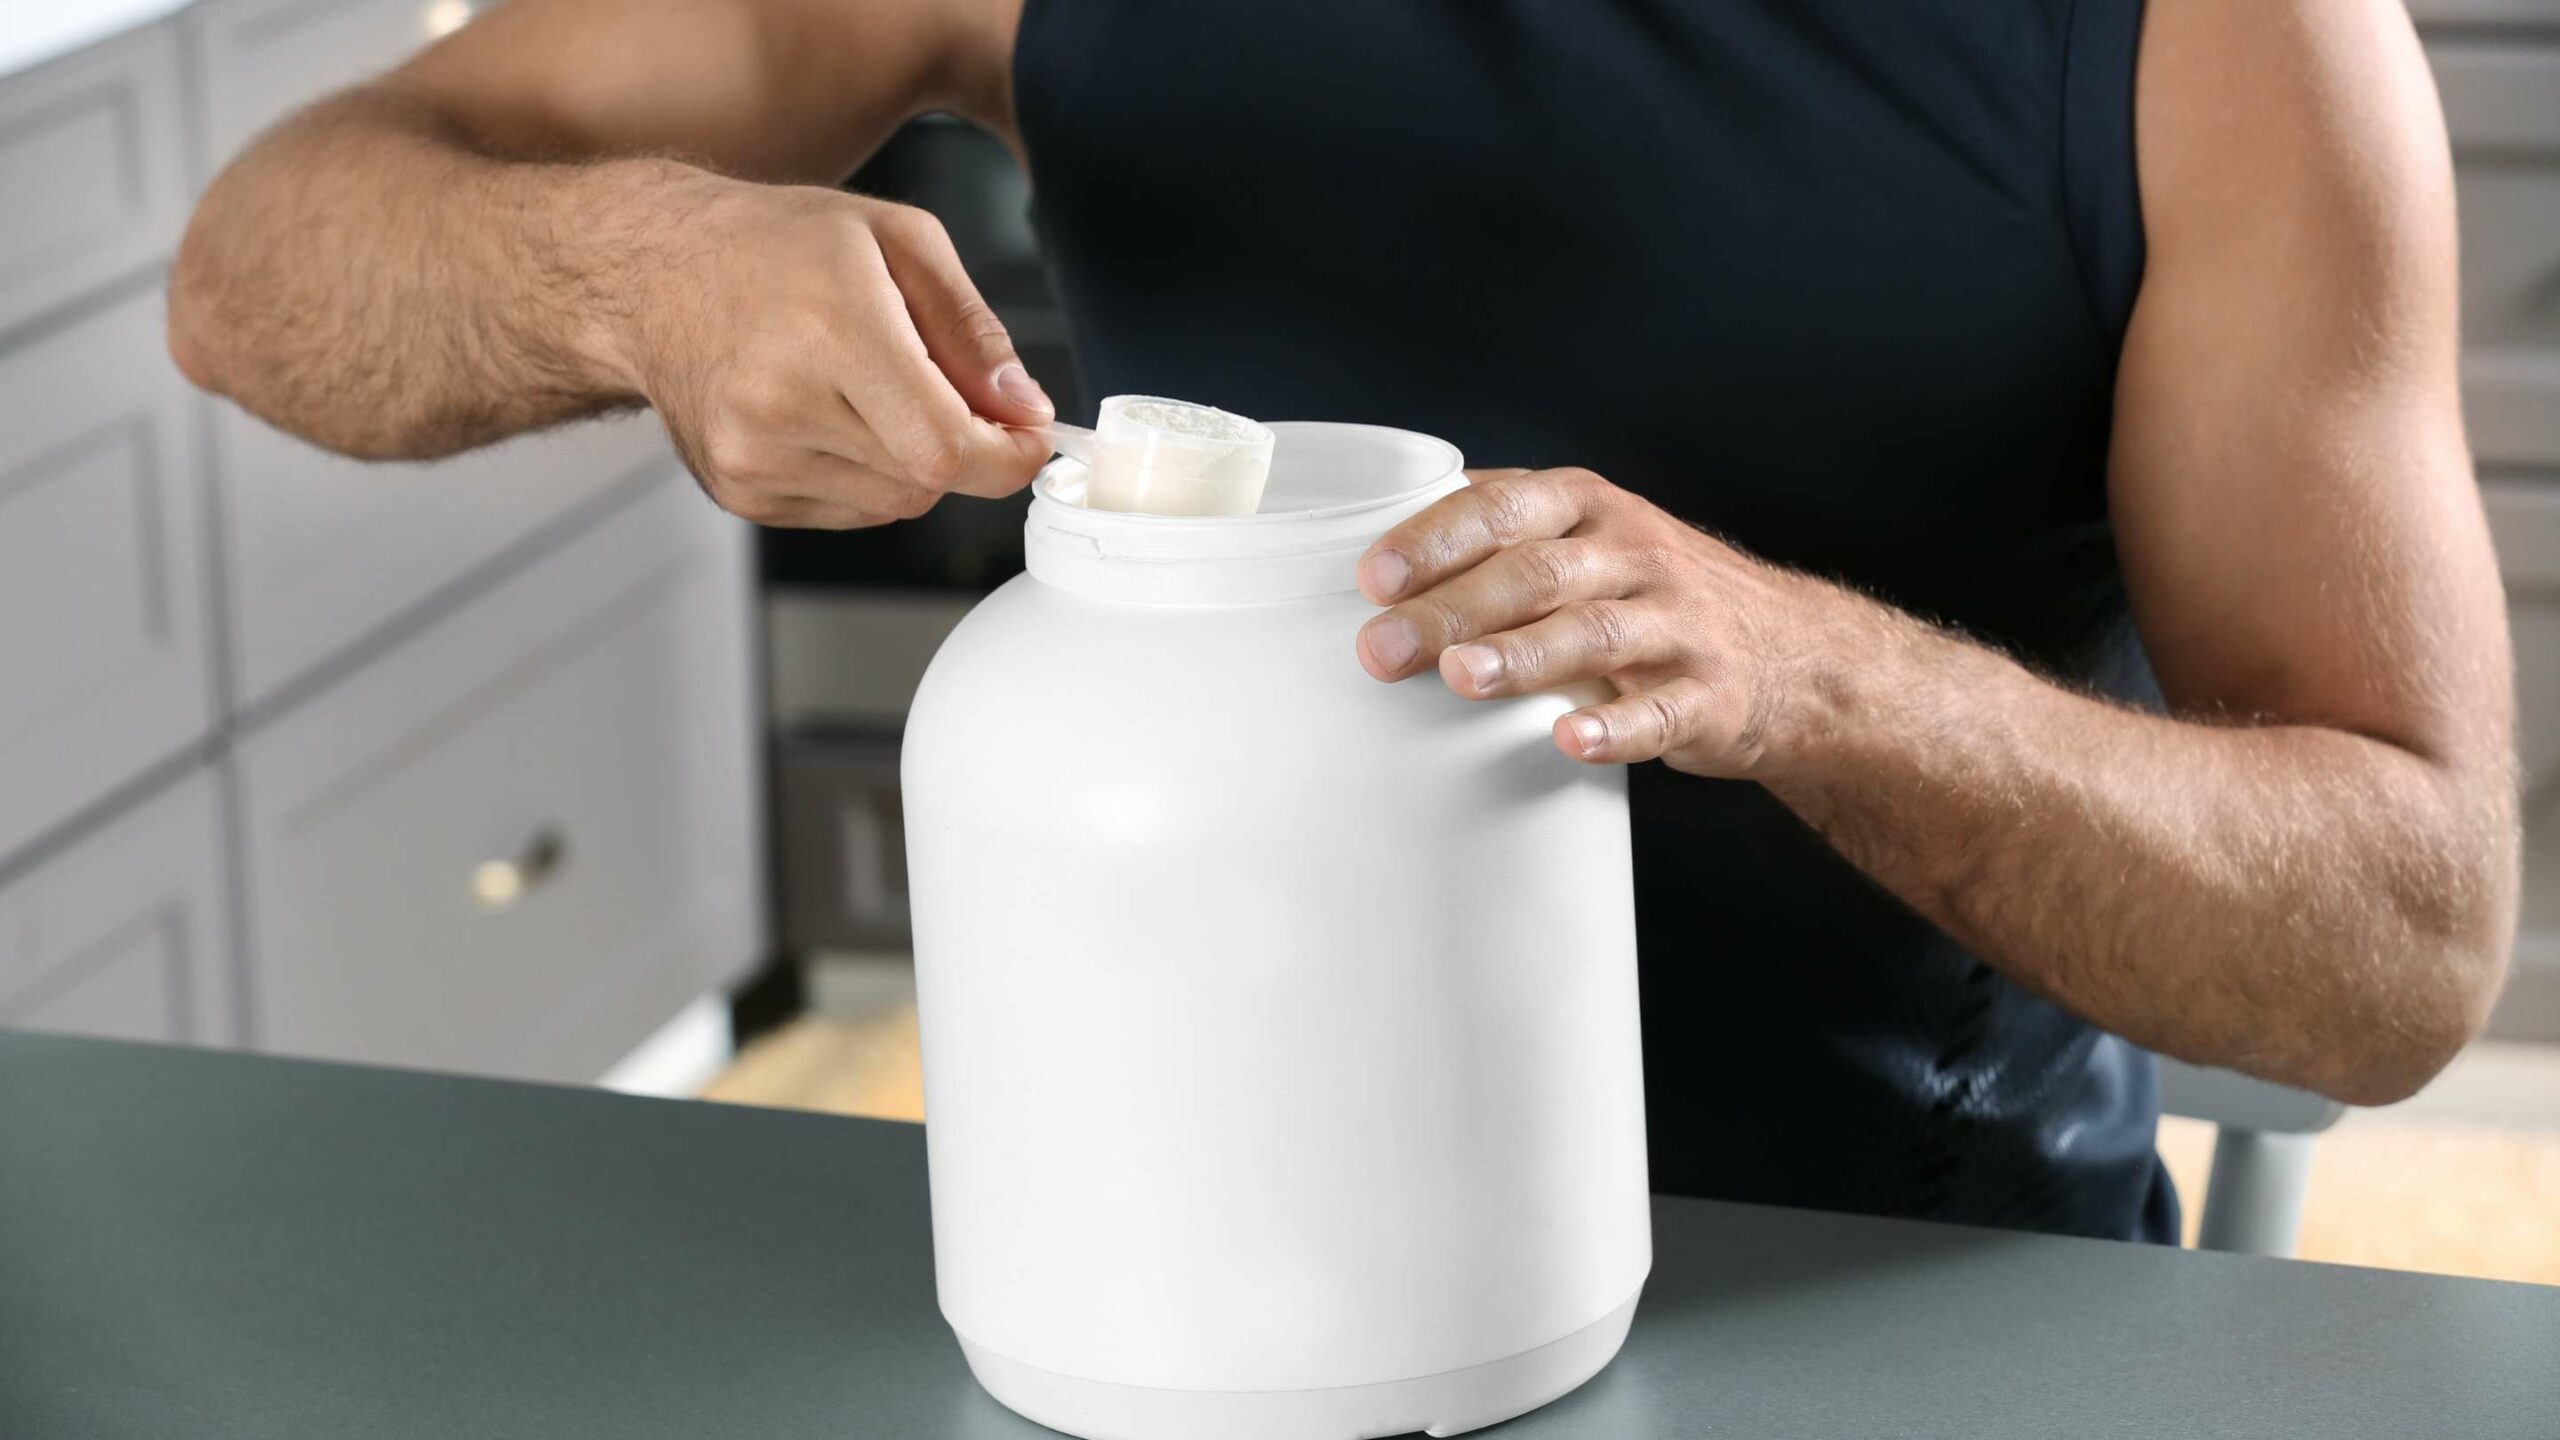 What to Look for in a Good Meal Replacement Shake for Men